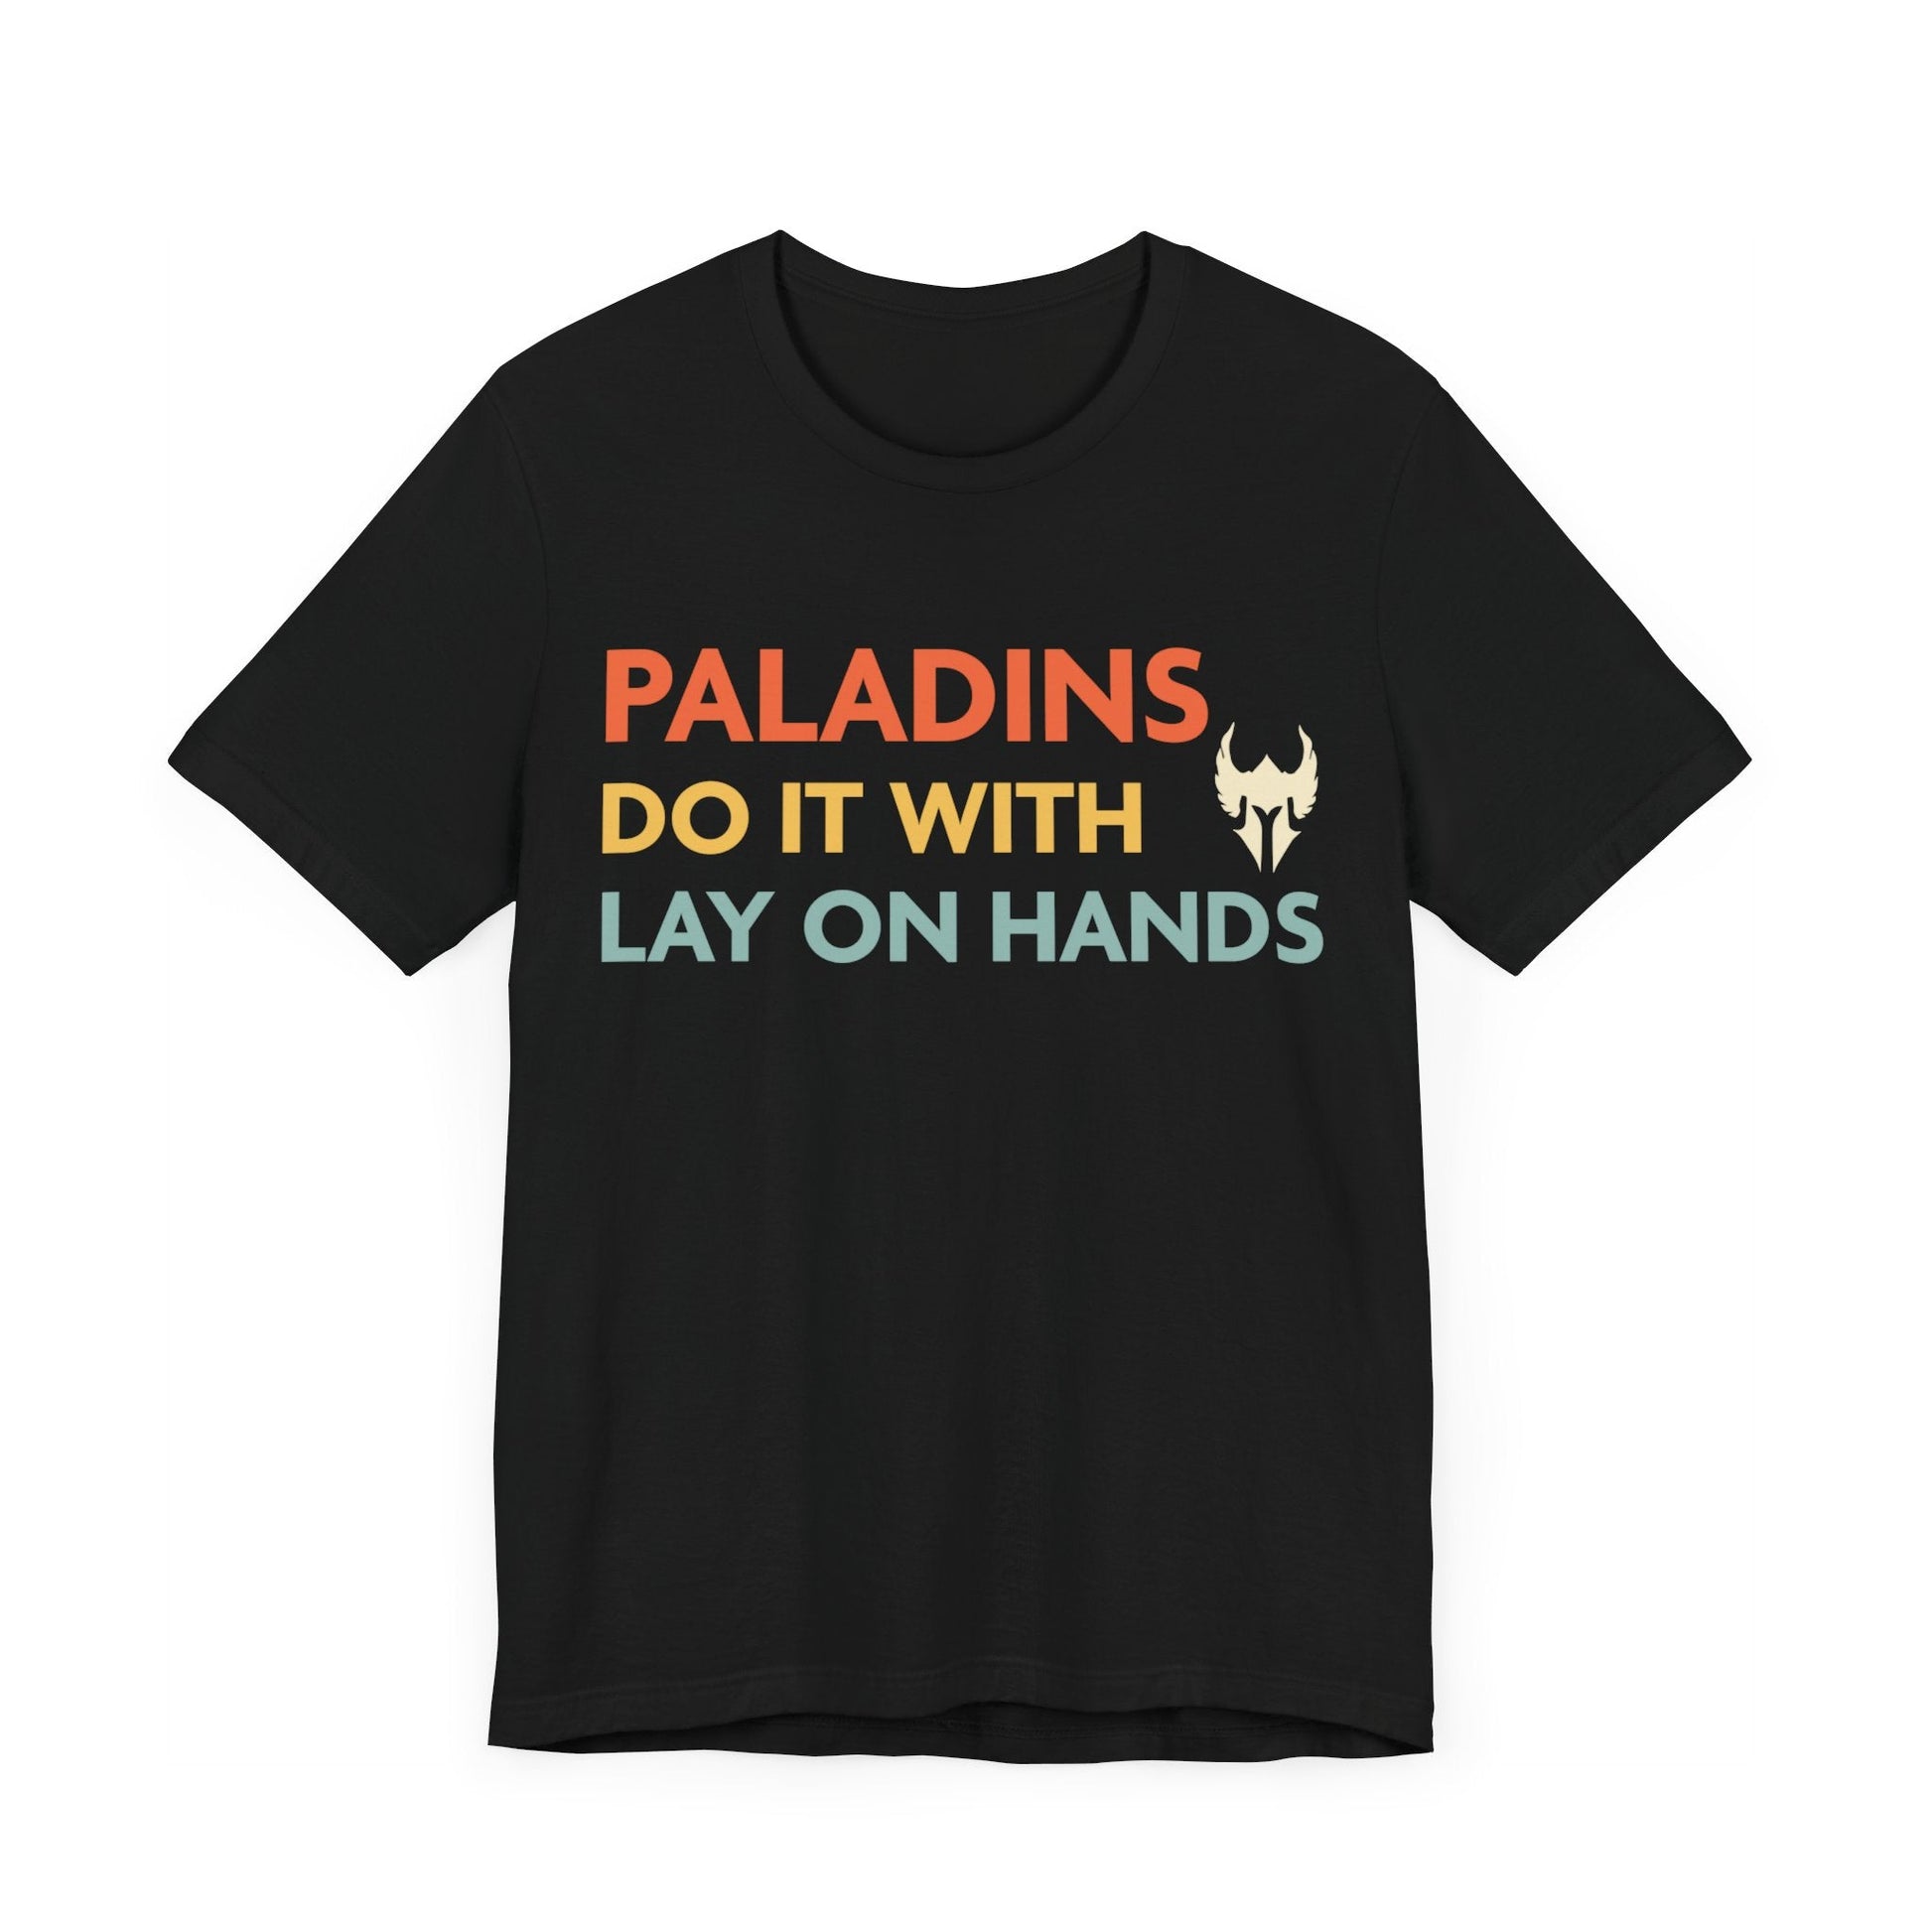 DnD Paladins Do It With Lay On Hands Shirt T-Shirt Black / S